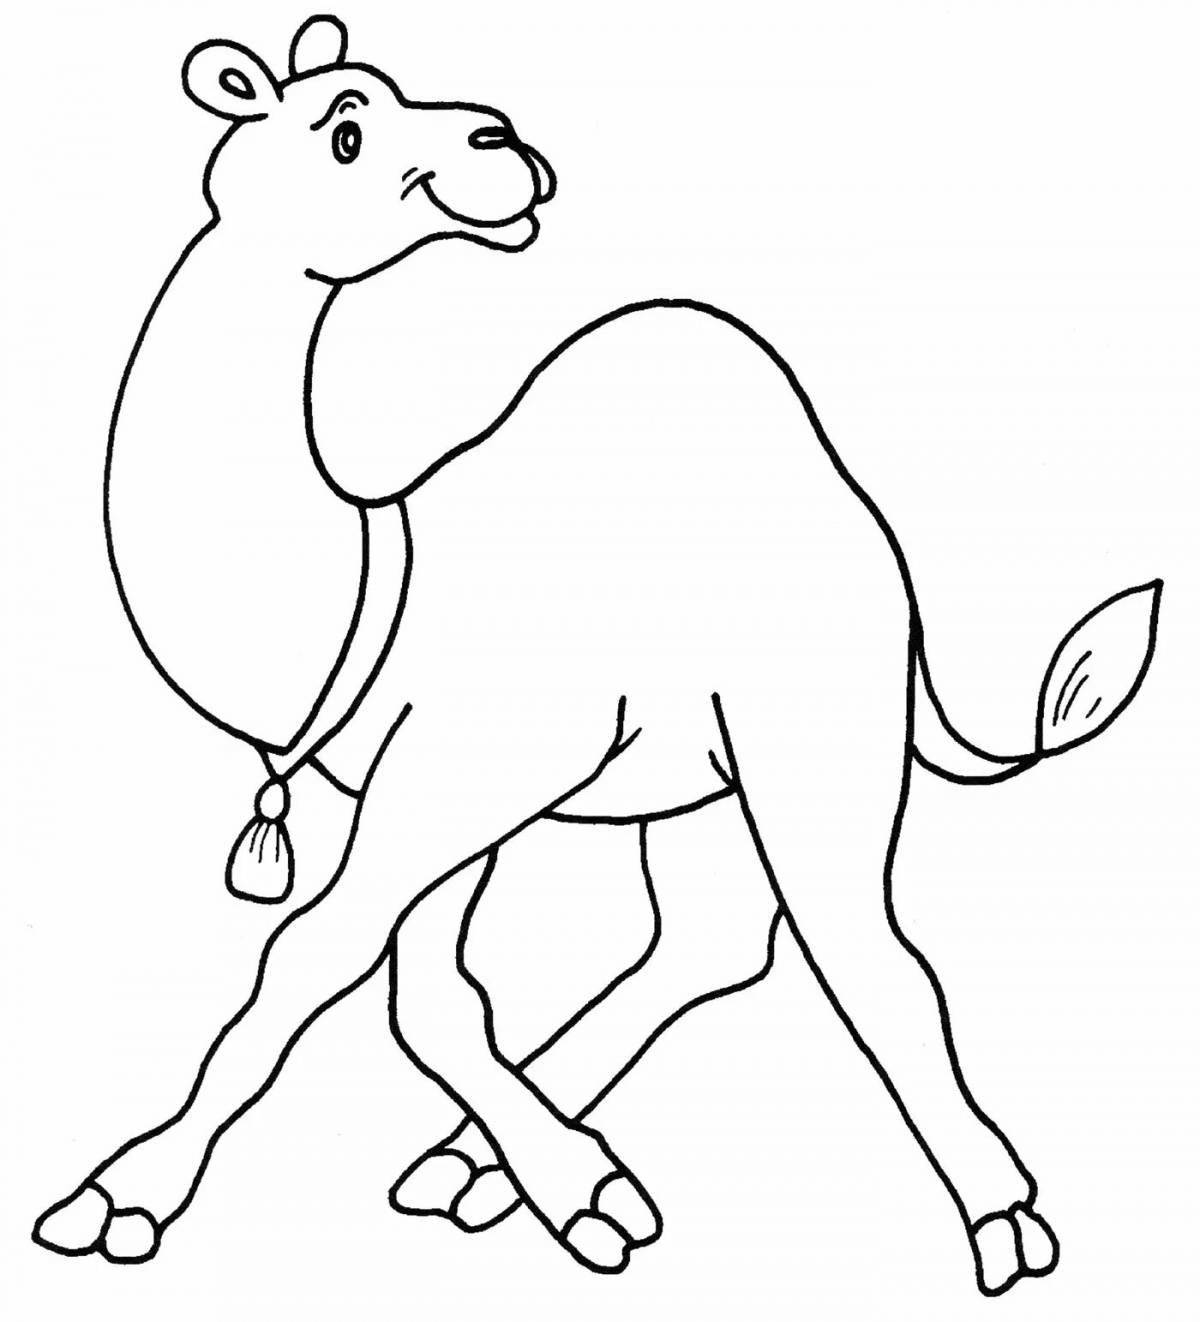 Outstanding camel coloring page for 6-7 year olds